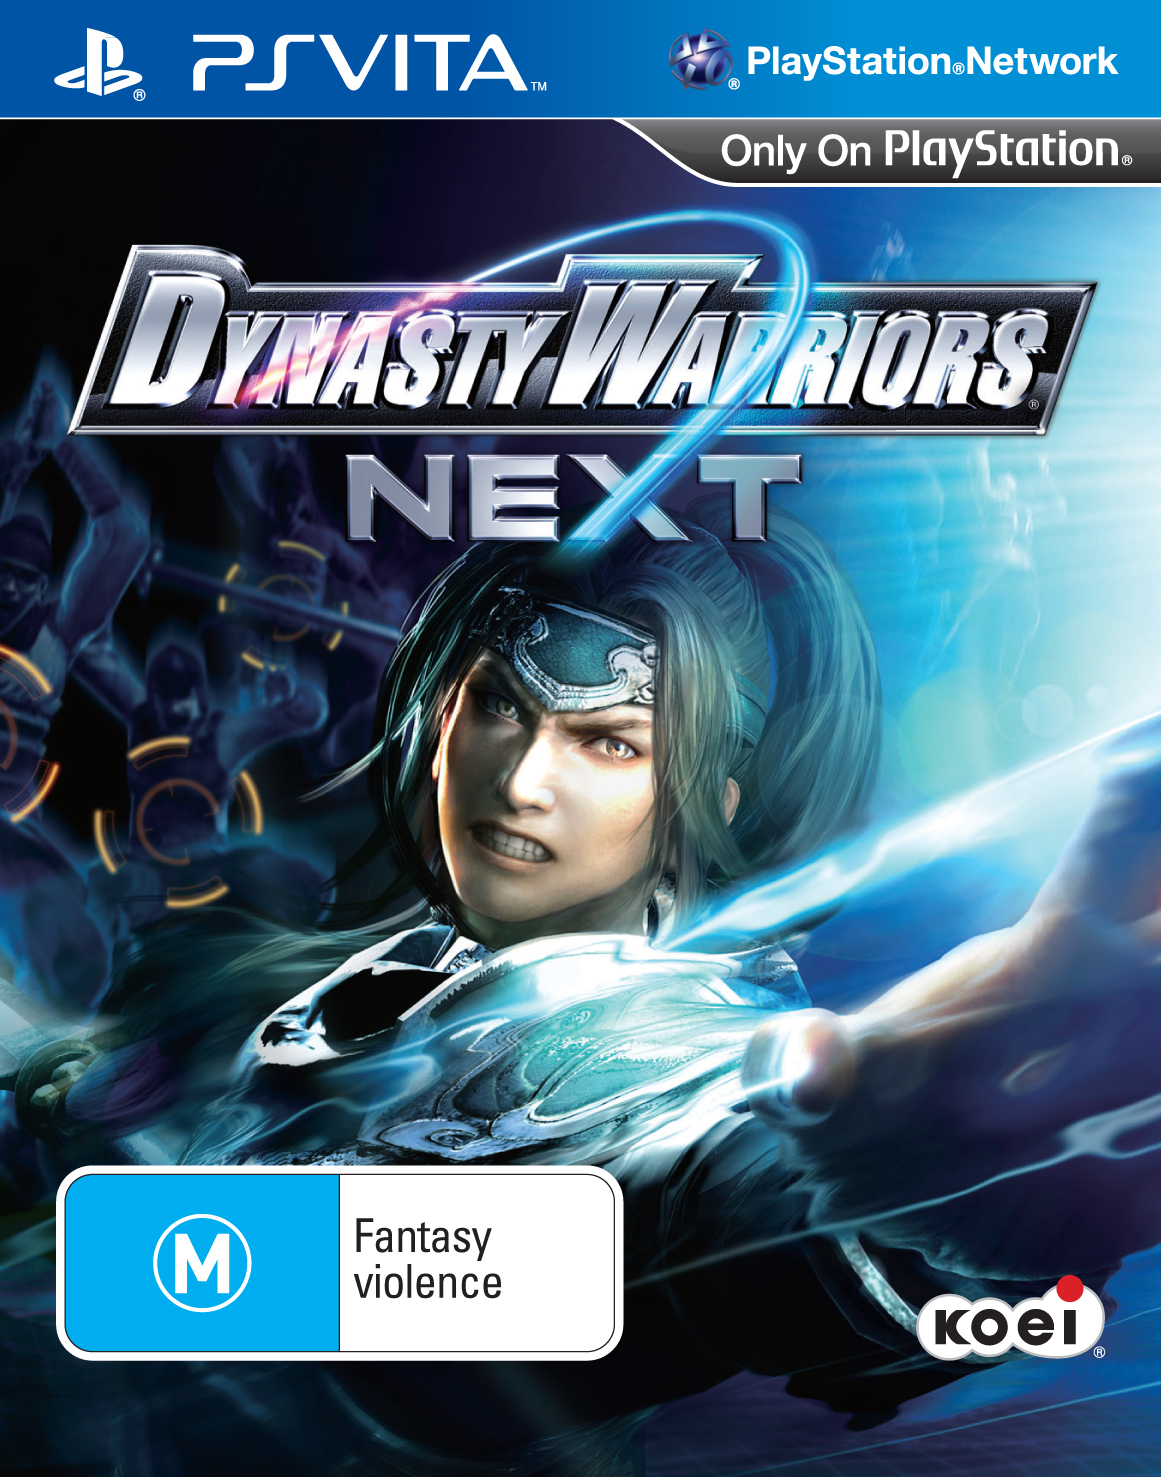 latest dynasty warriors game